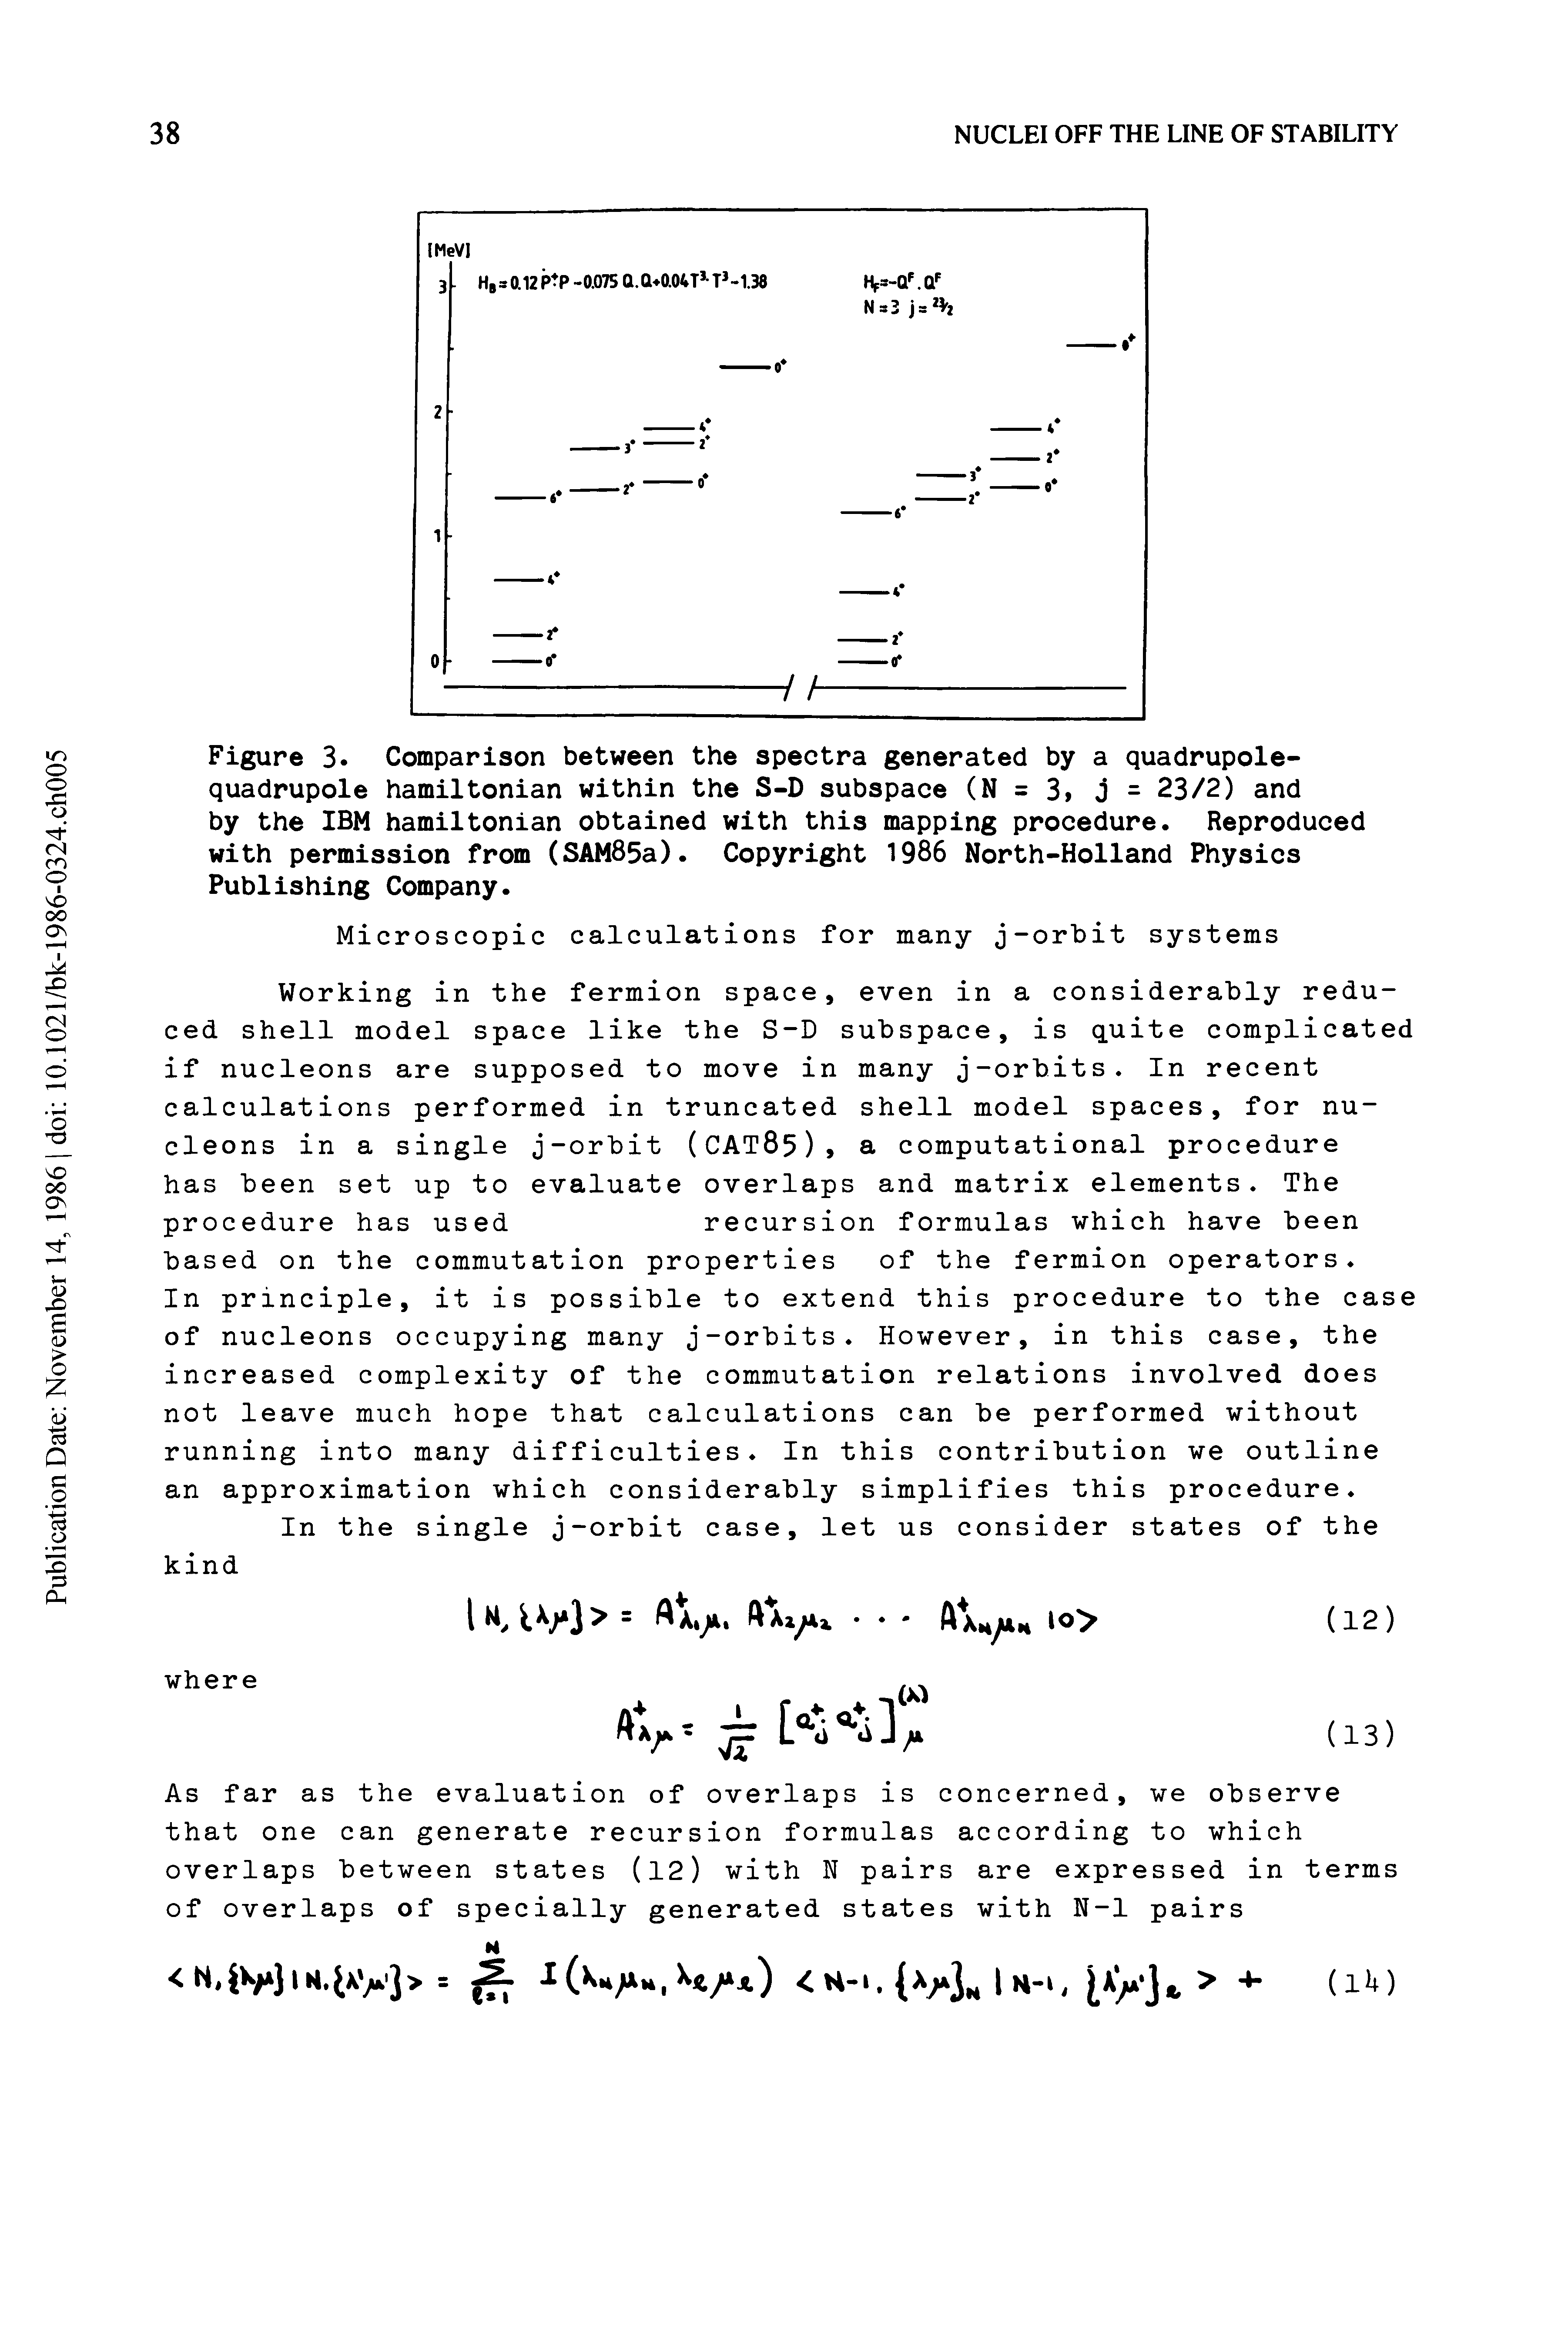 Figure 3. Comparison between the spectra generated by a quadrupole-quadrupole hamiltonian within the S-D subspace (N = 3, j = 23/2) and by the IBM hamiltonian obtained with this mapping procedure. Reproduced with permission from (SAM85a). Copyright 1986 North-Holland Physics Publishing Company.